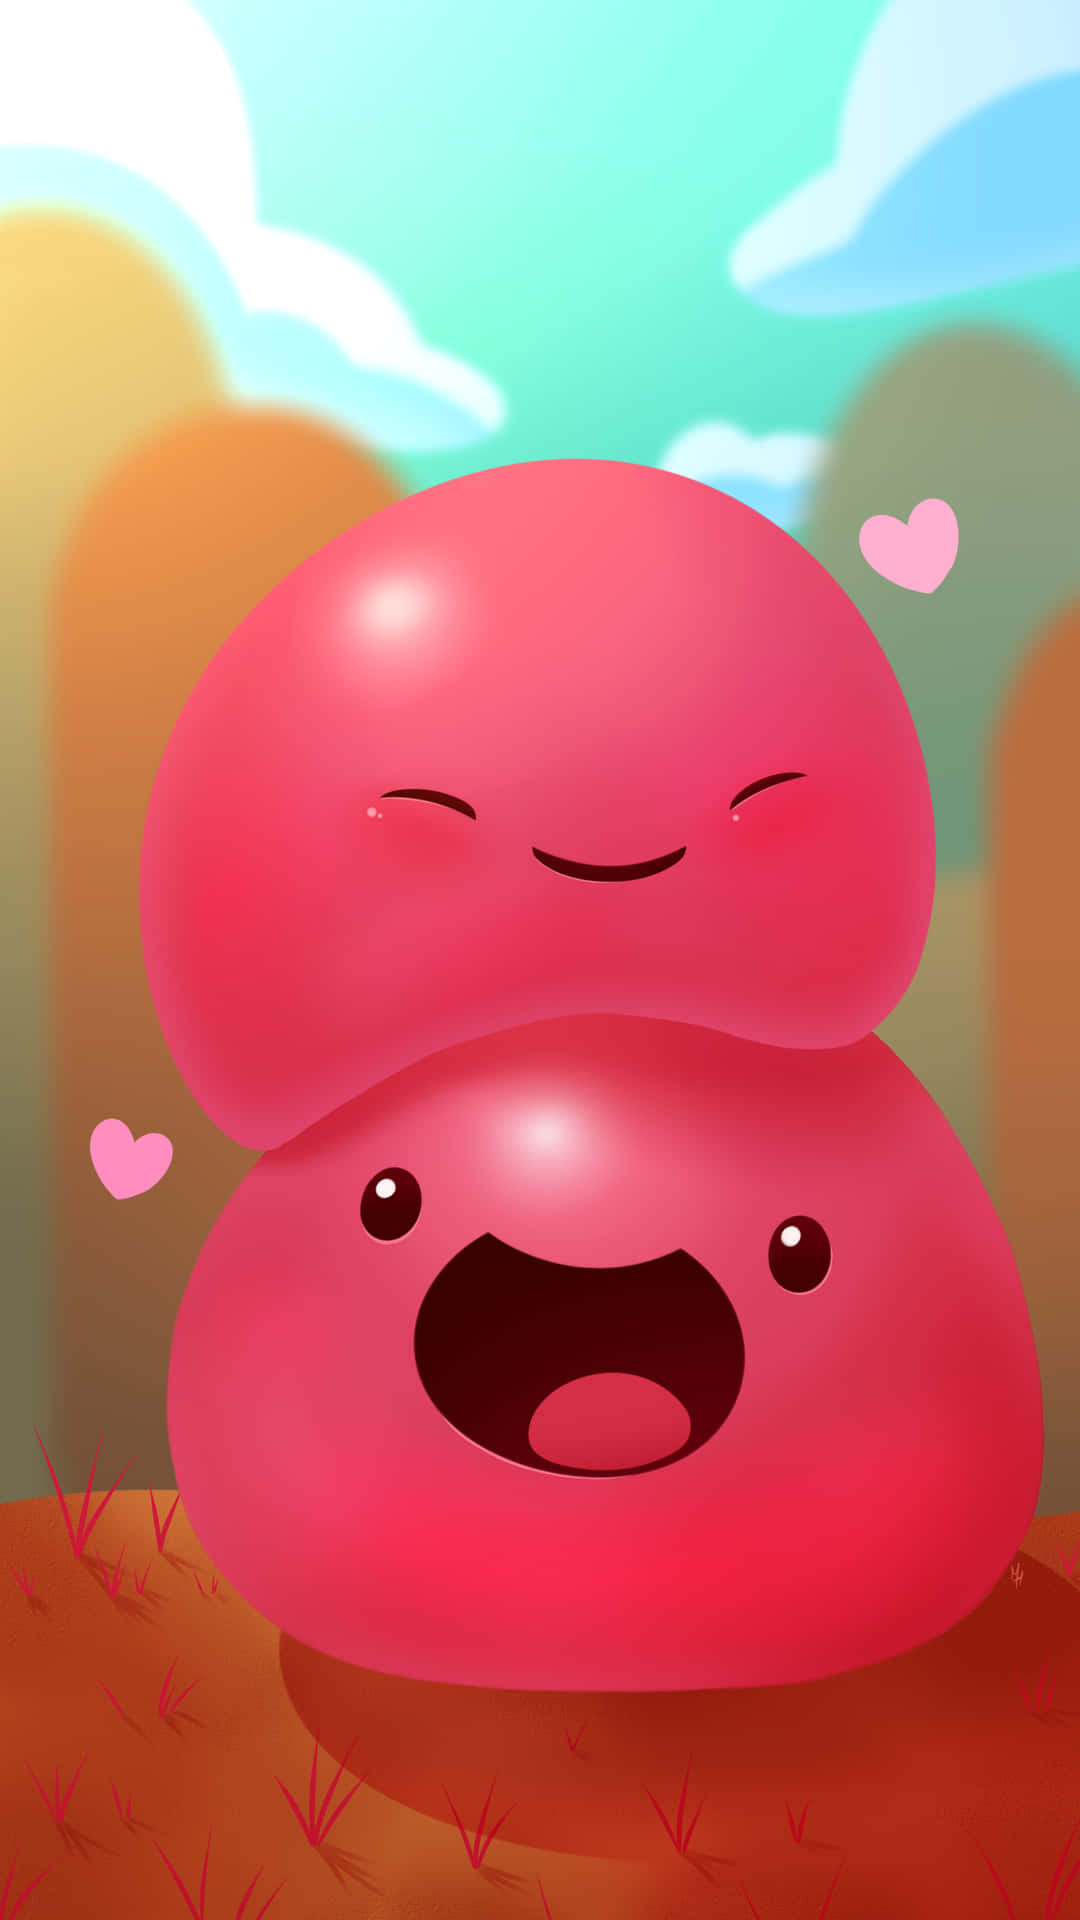 A Pink Kawaii Blob With A Smile On Its Face Background